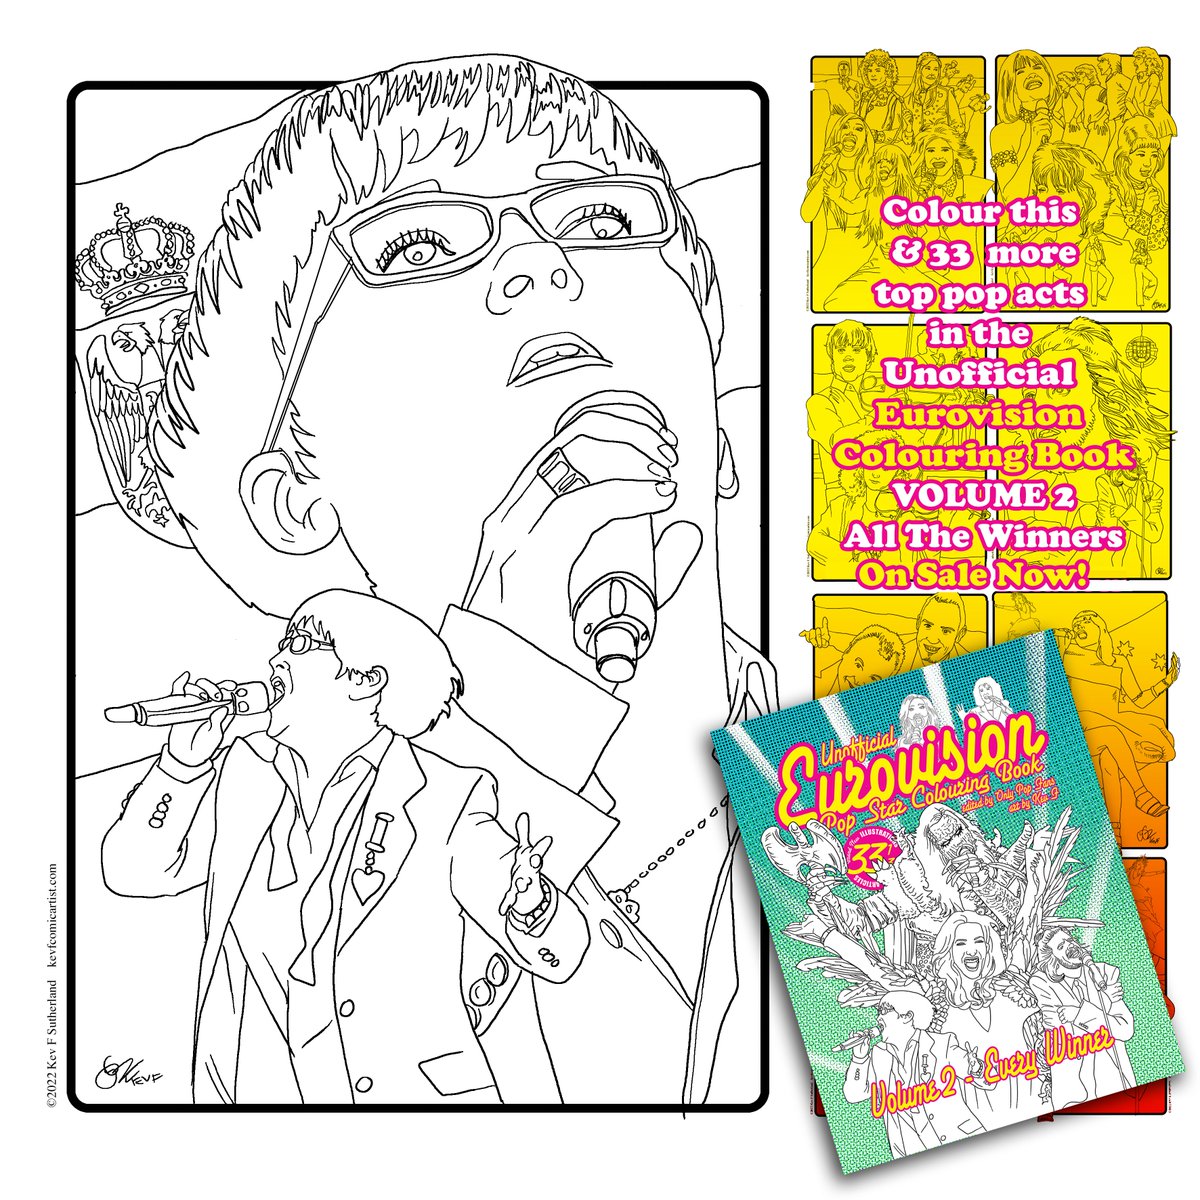 Every winning country, every winning entry! (And some that deserved to)

Colour them now in the #Eurovision Pop Star Colouring Book - get it in time for the Grand Final

#Eurovision2024 #ESC2024 #unitedbymusic #Serbia 

amazon.co.uk/dp/1470948907